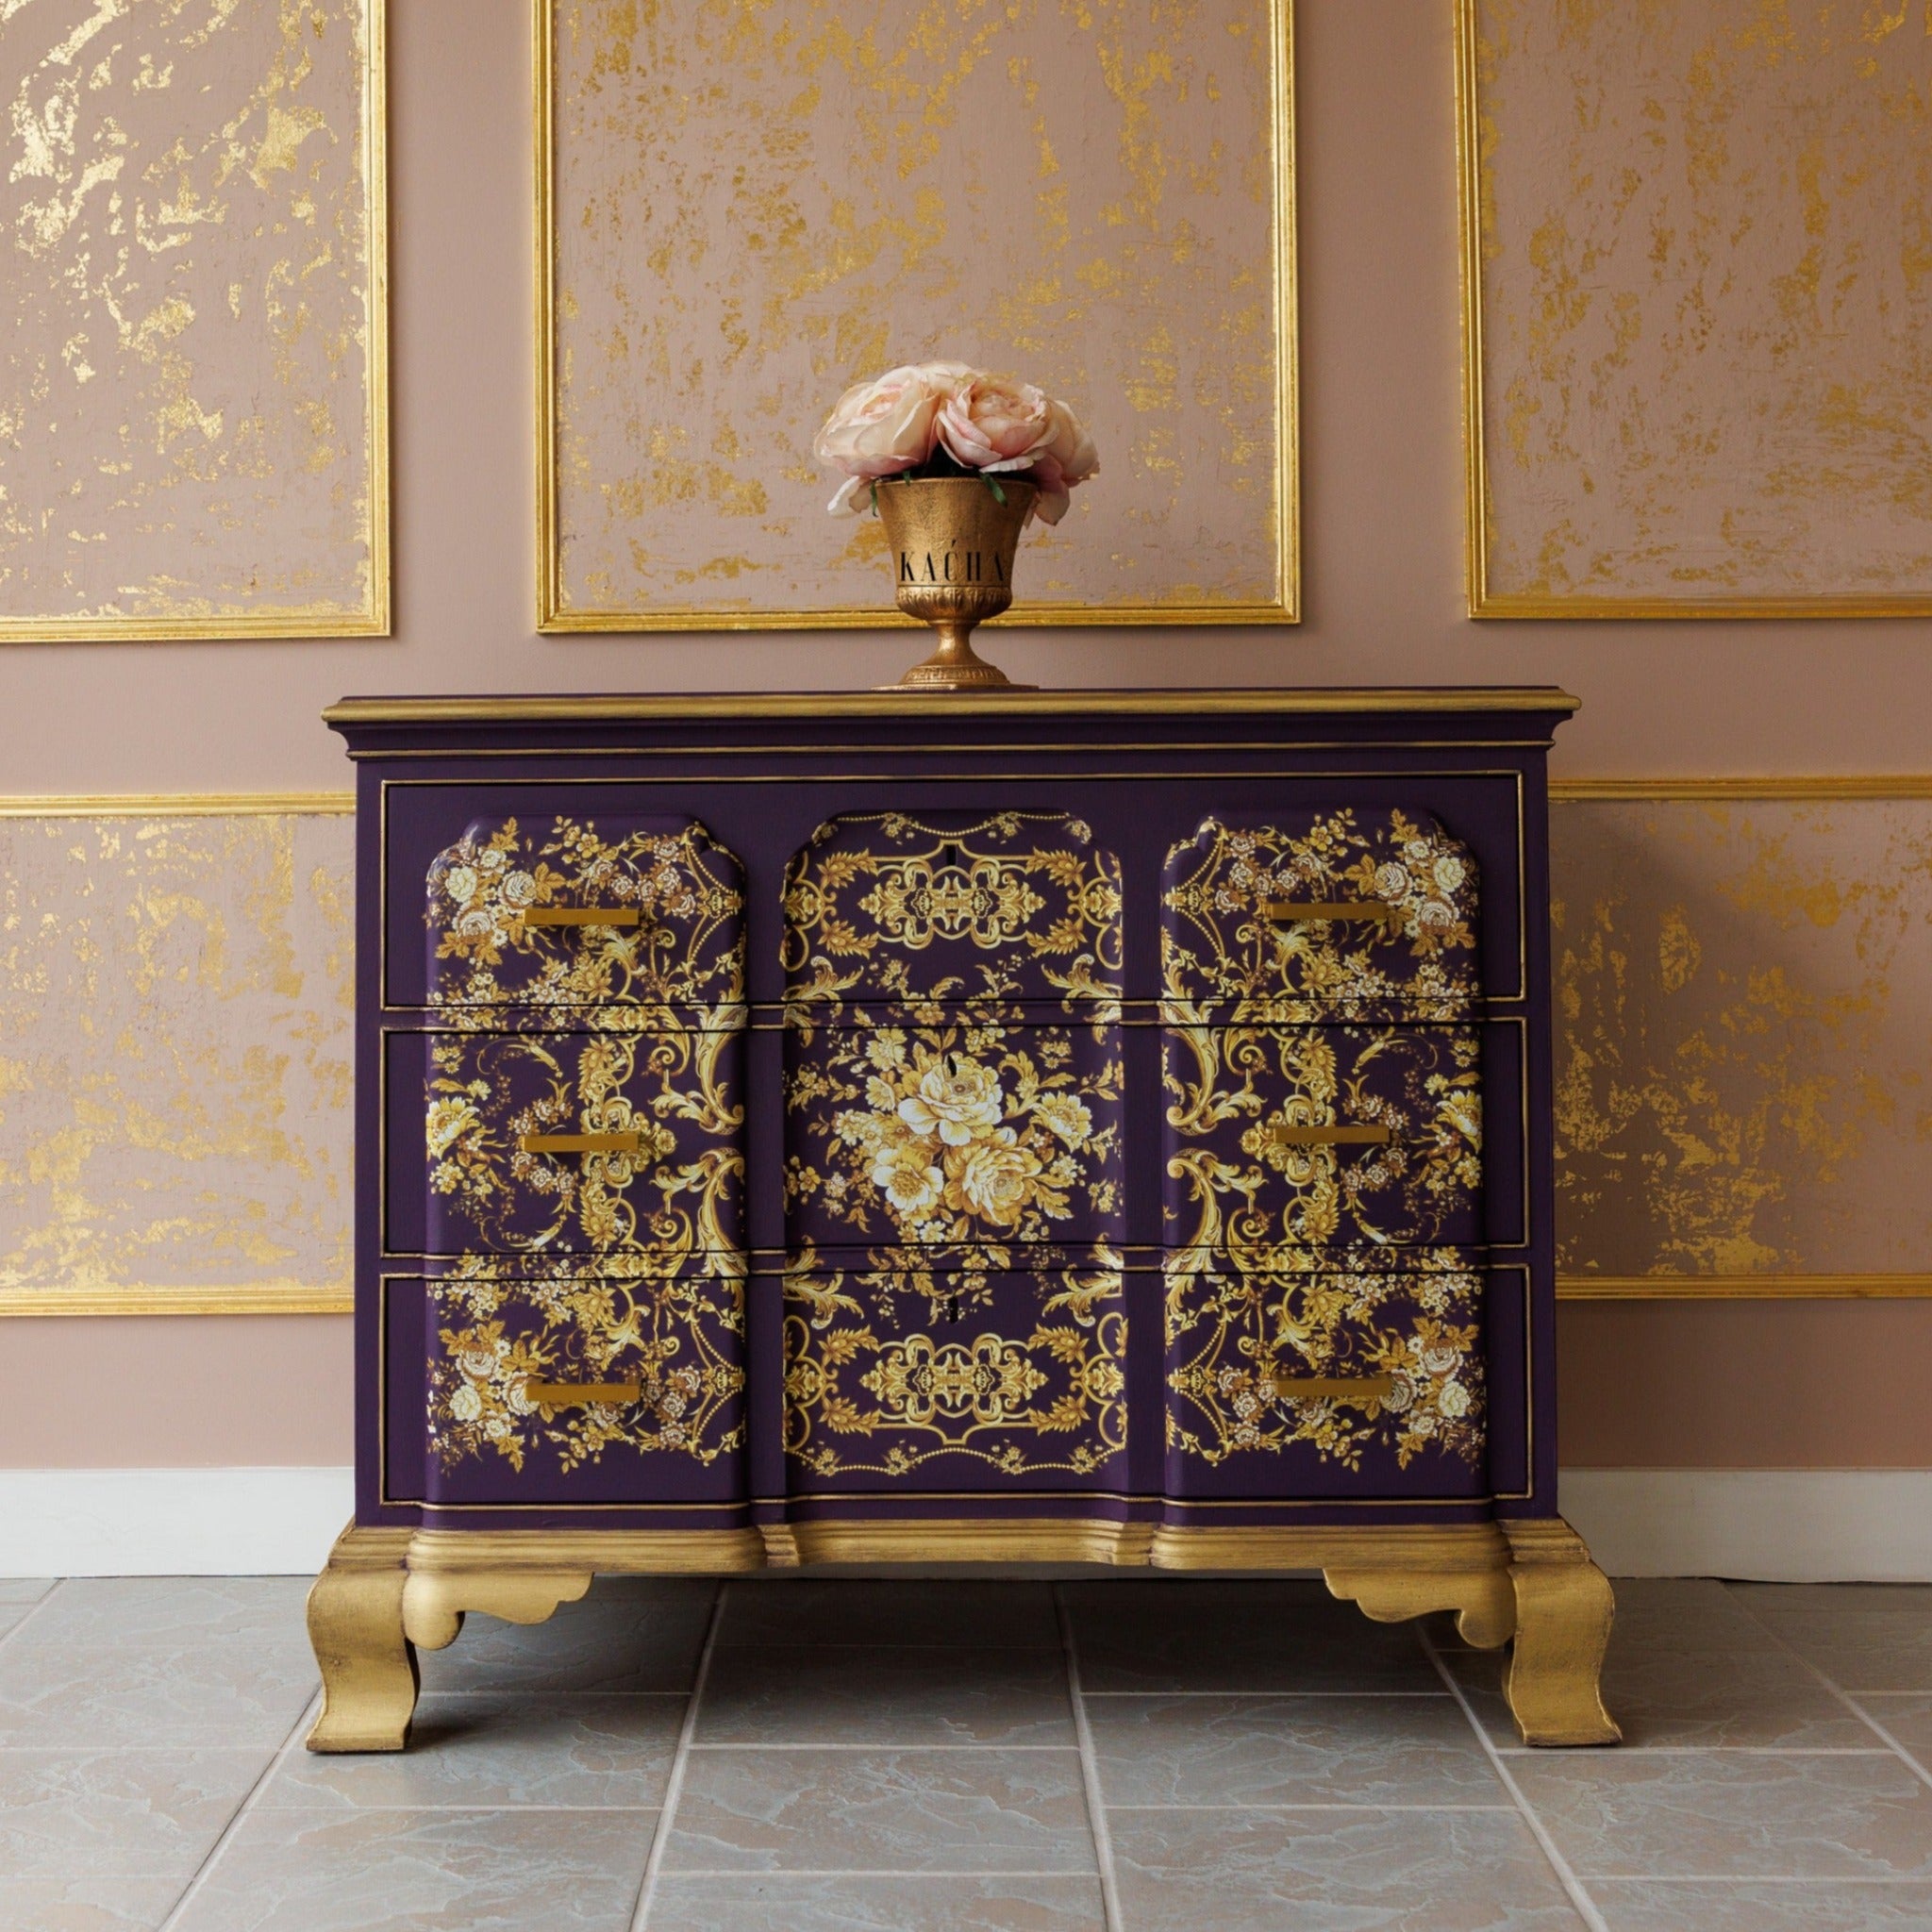 A vintage dresser refurbished by Kacha is painted a deep purple with gold accents and features ReDesign with Prima's Kacha Orleans on its drawers.